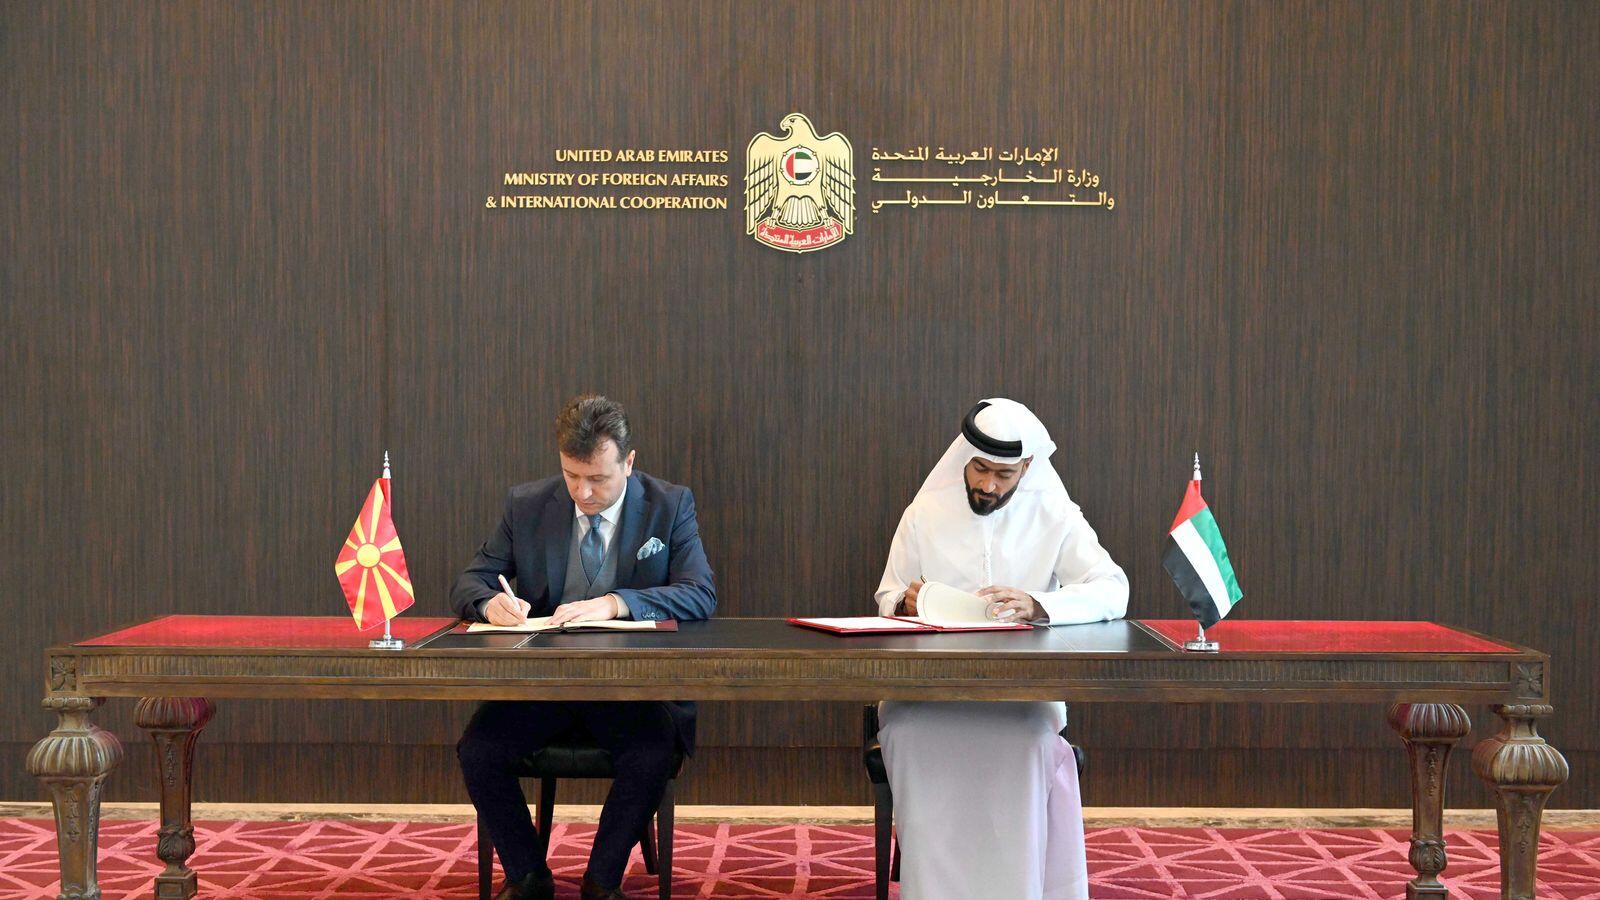 UAE visa: Free entry to North Macedonia announced for certain passport holders - News